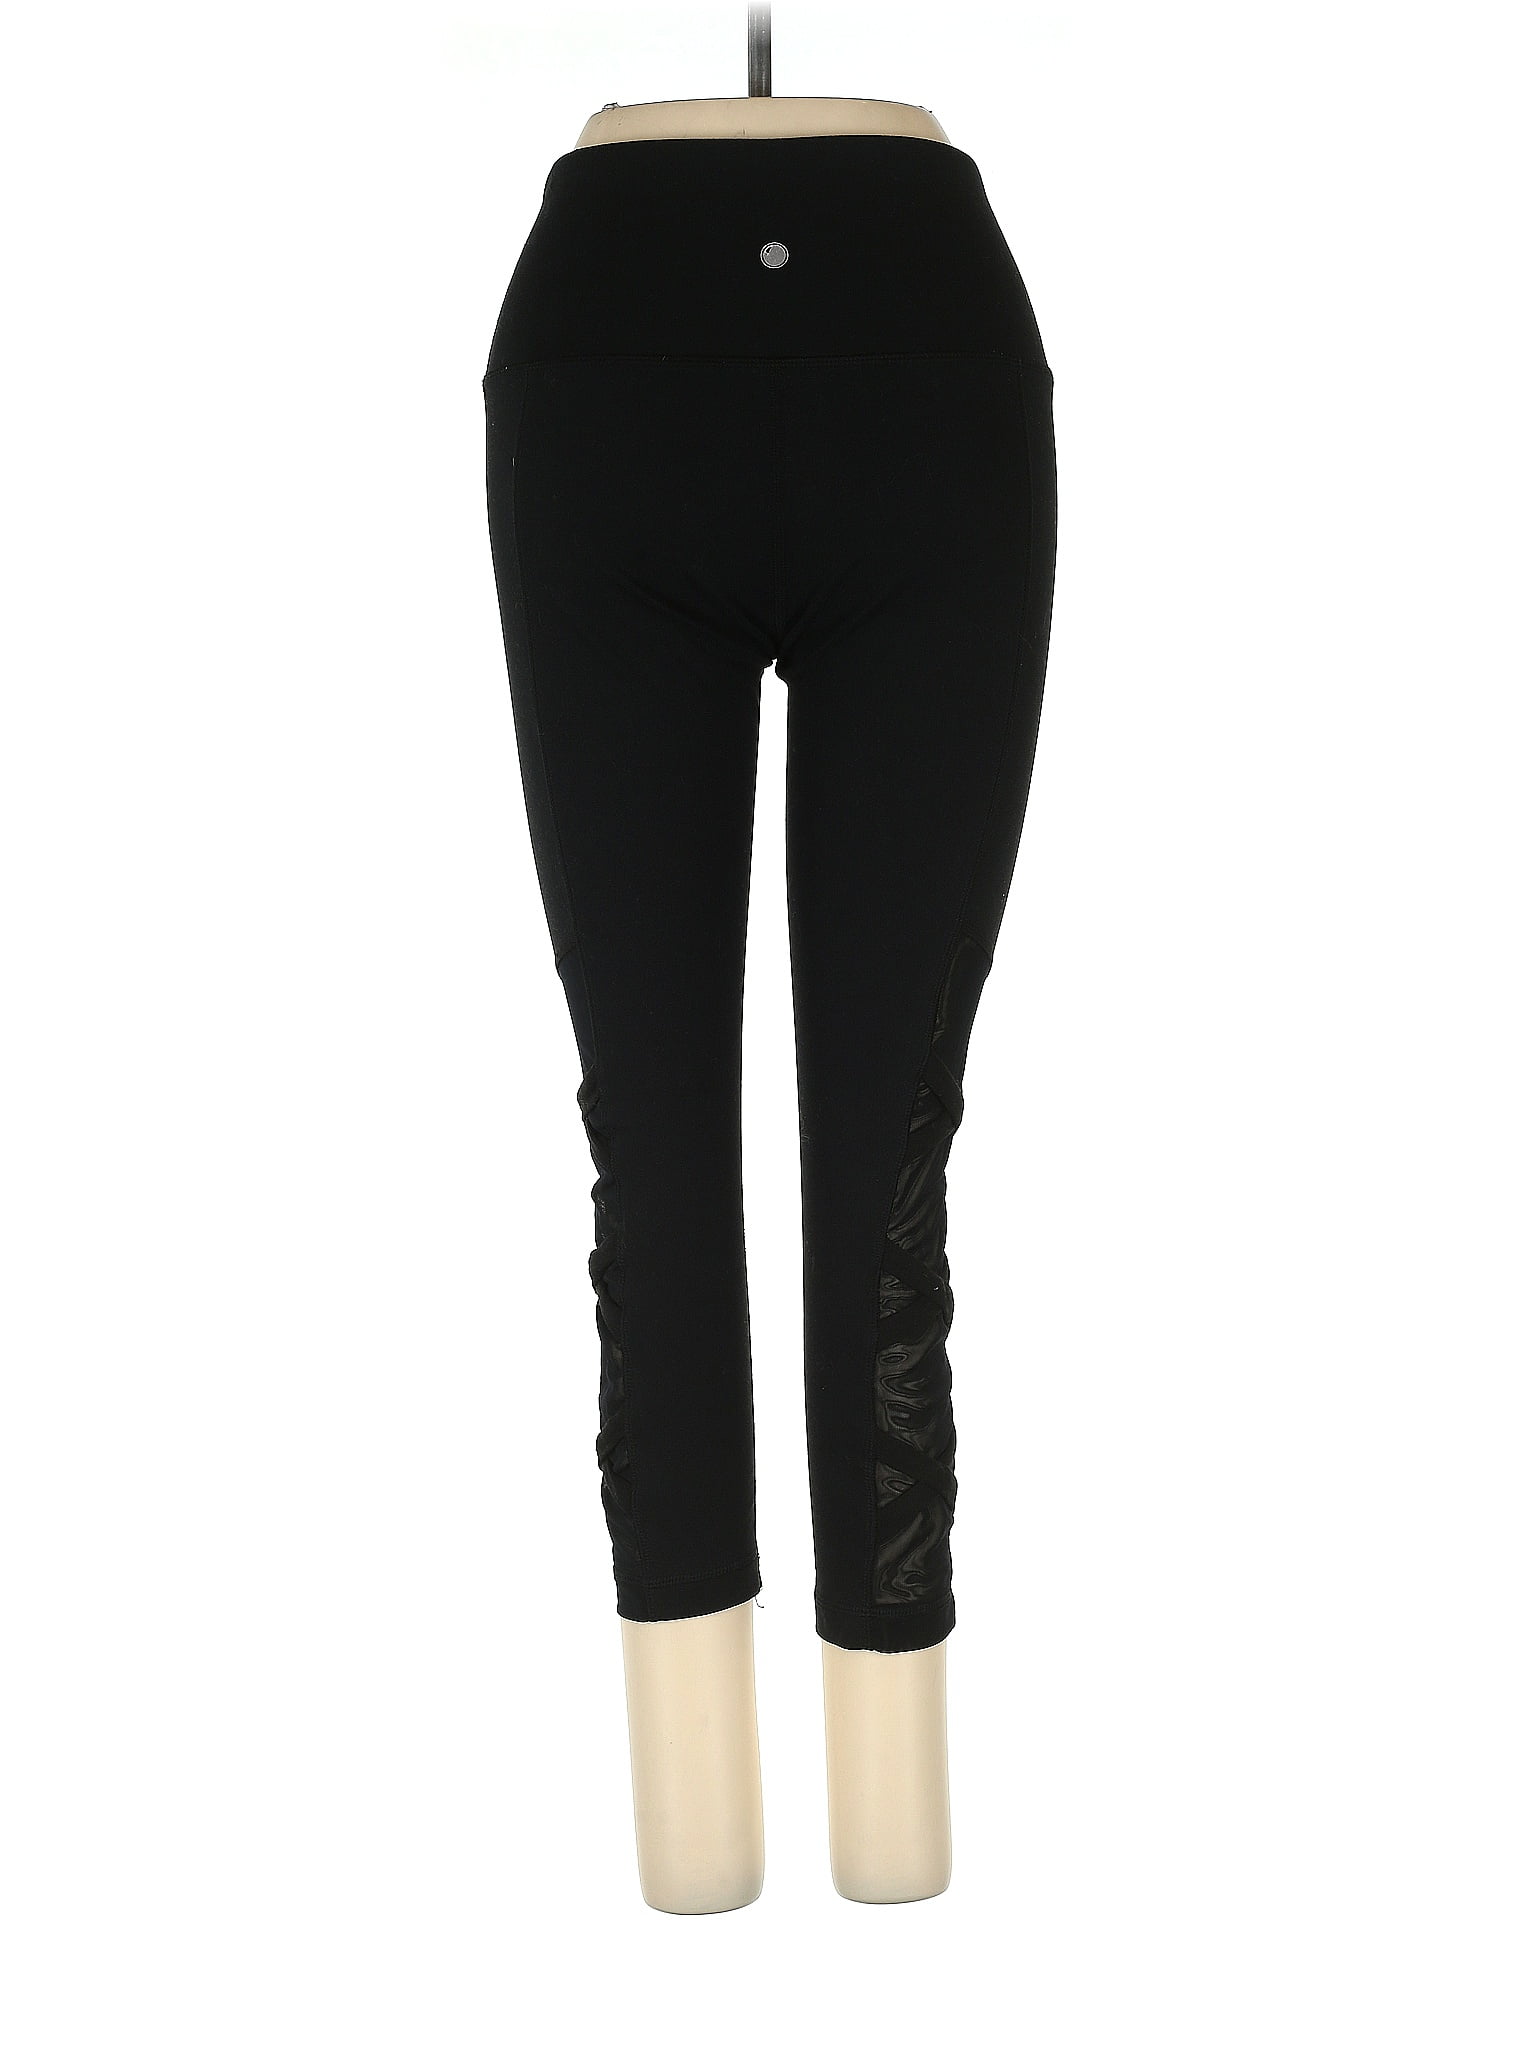 90 Degree by Reflex Solid Black Leggings Size L - 56% off